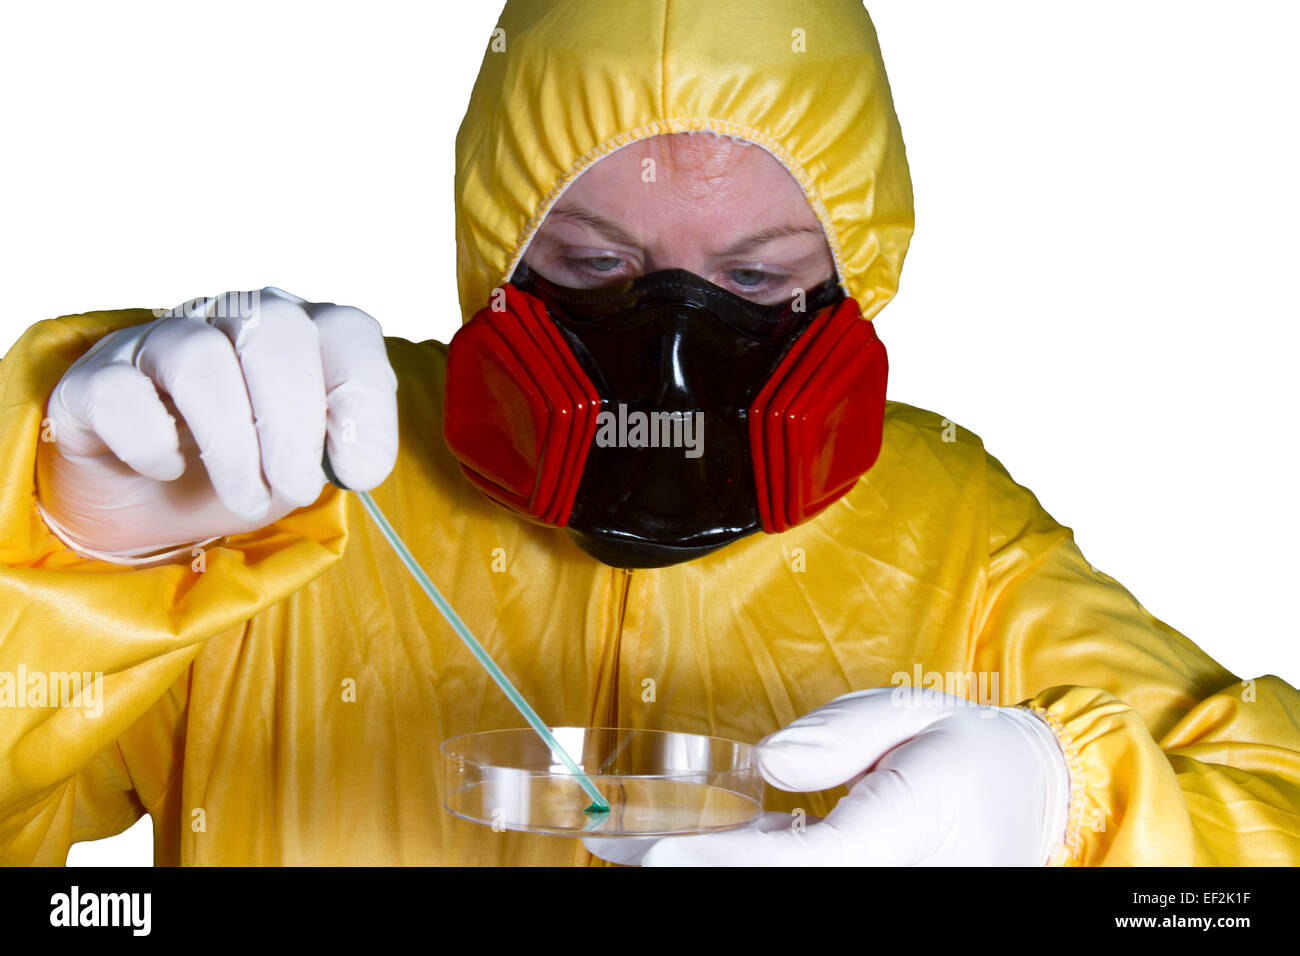 Woman dressed in HazMat suit with gas mask and shield with petri dish Stock Photo